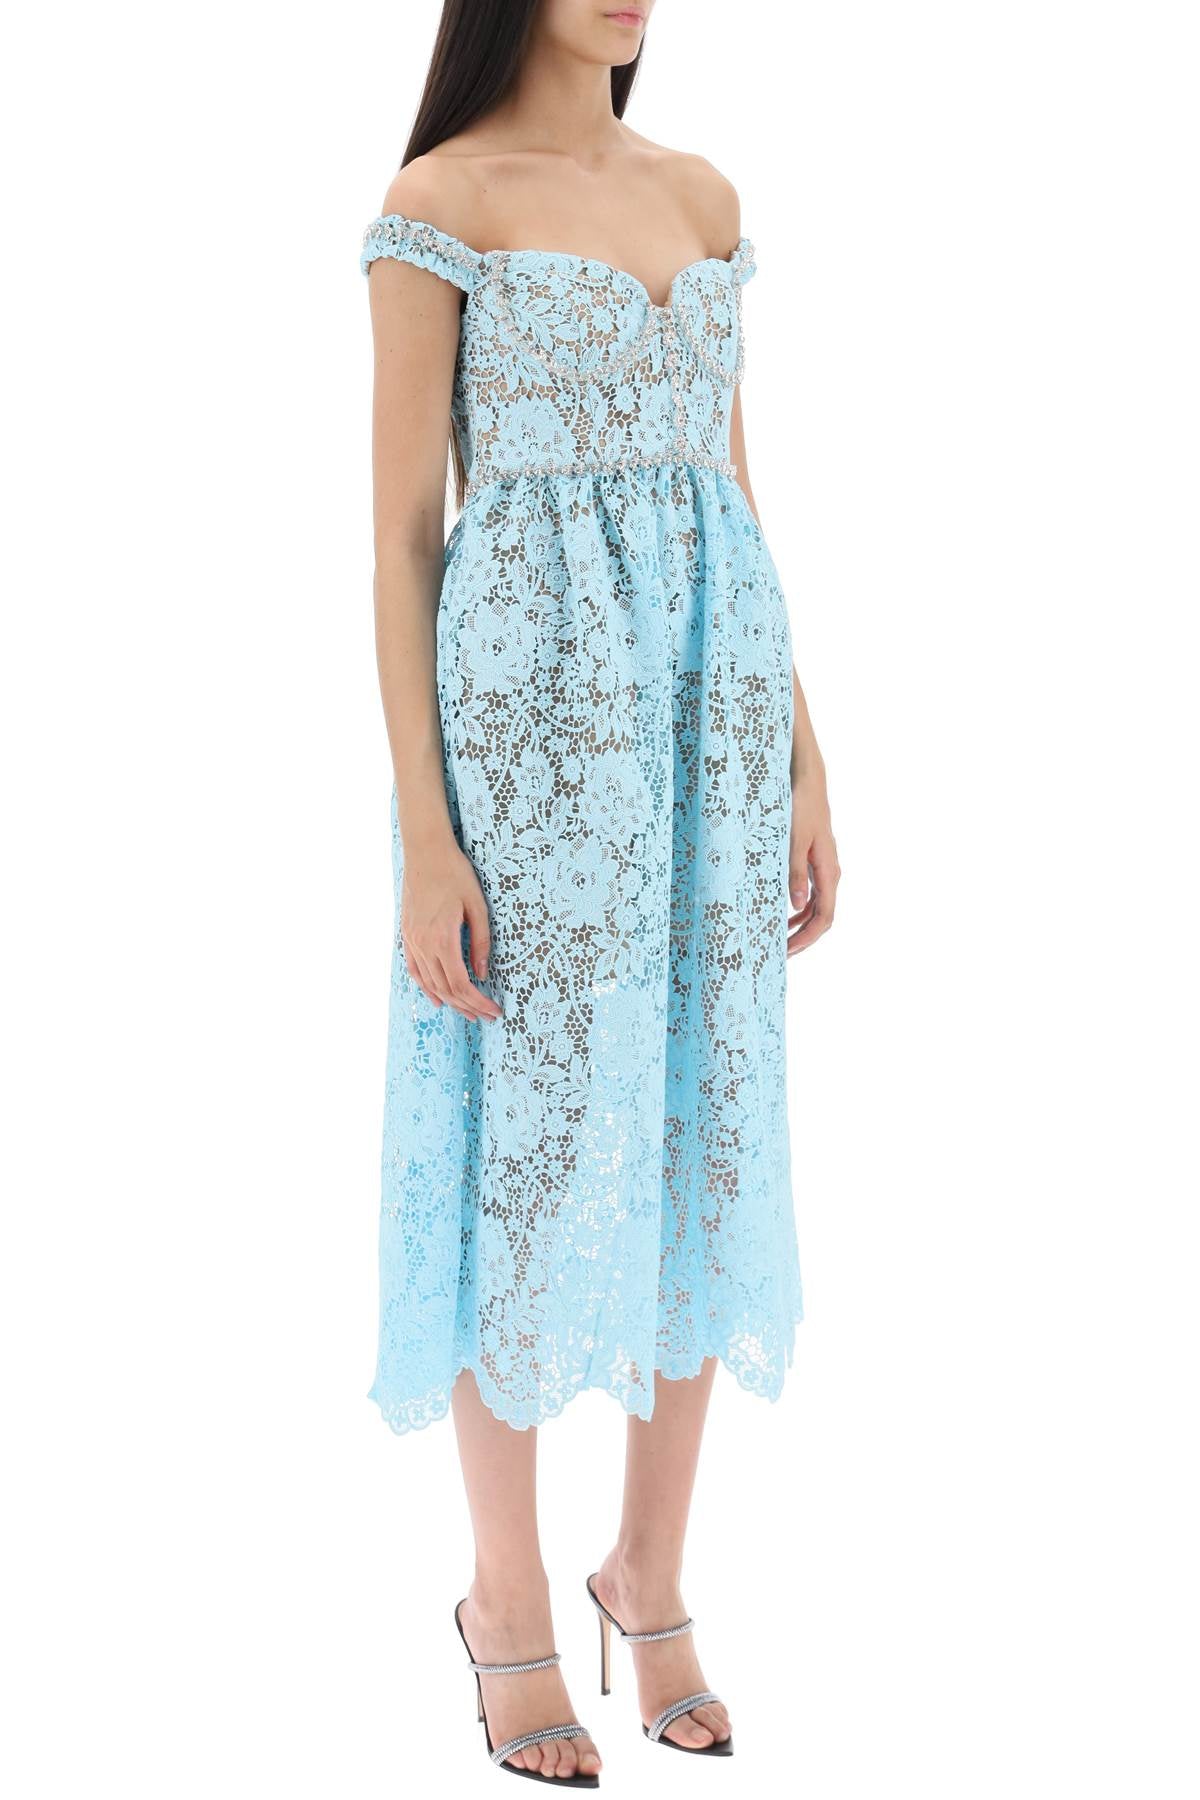 Self portrait midi dress in floral lace with crystals-1